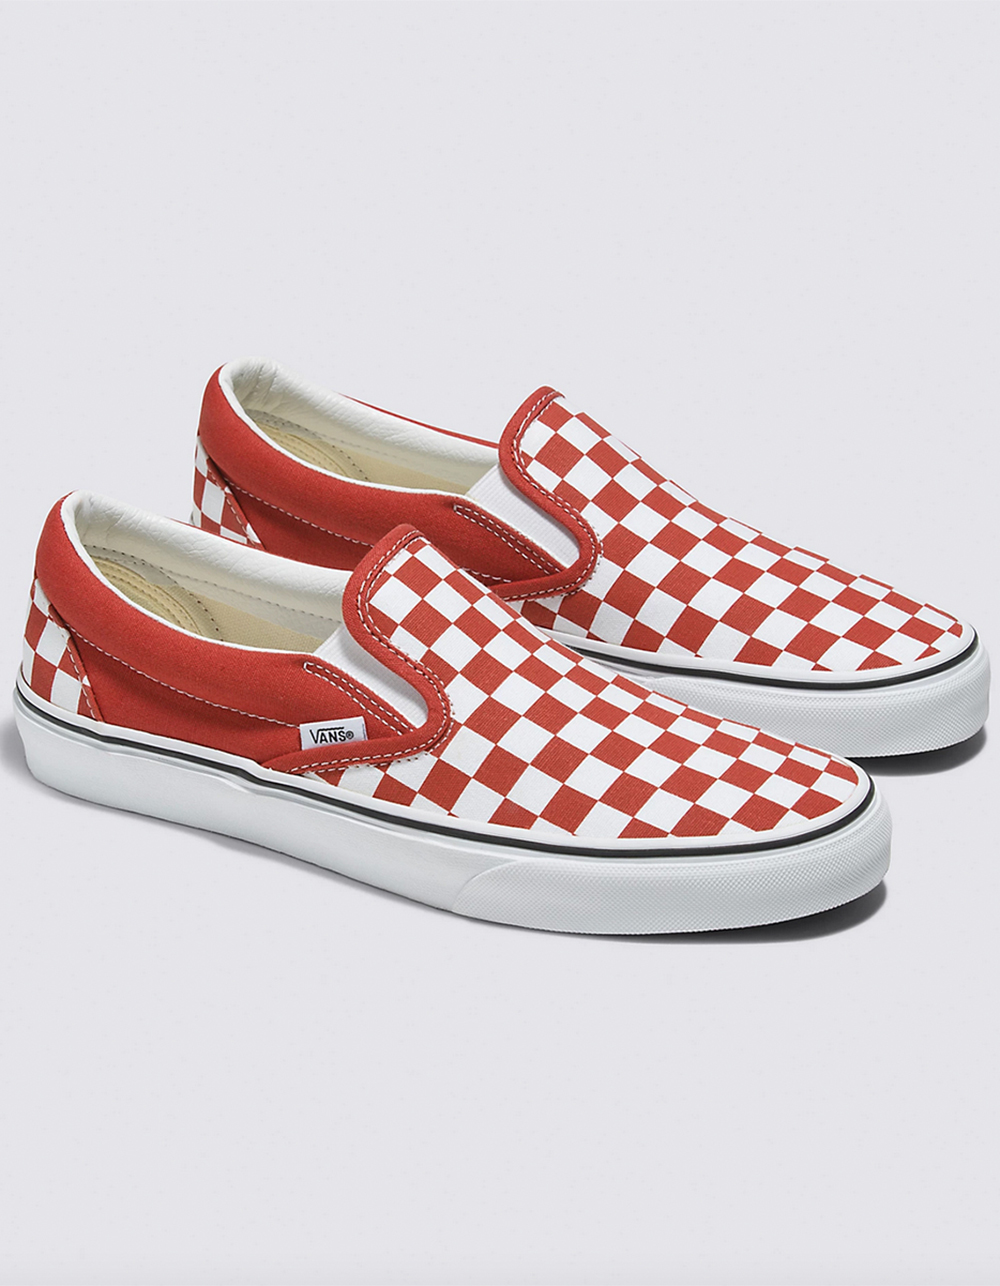 VANS Checkerboard Slip-On Shoes - RED/WHITE | Tillys